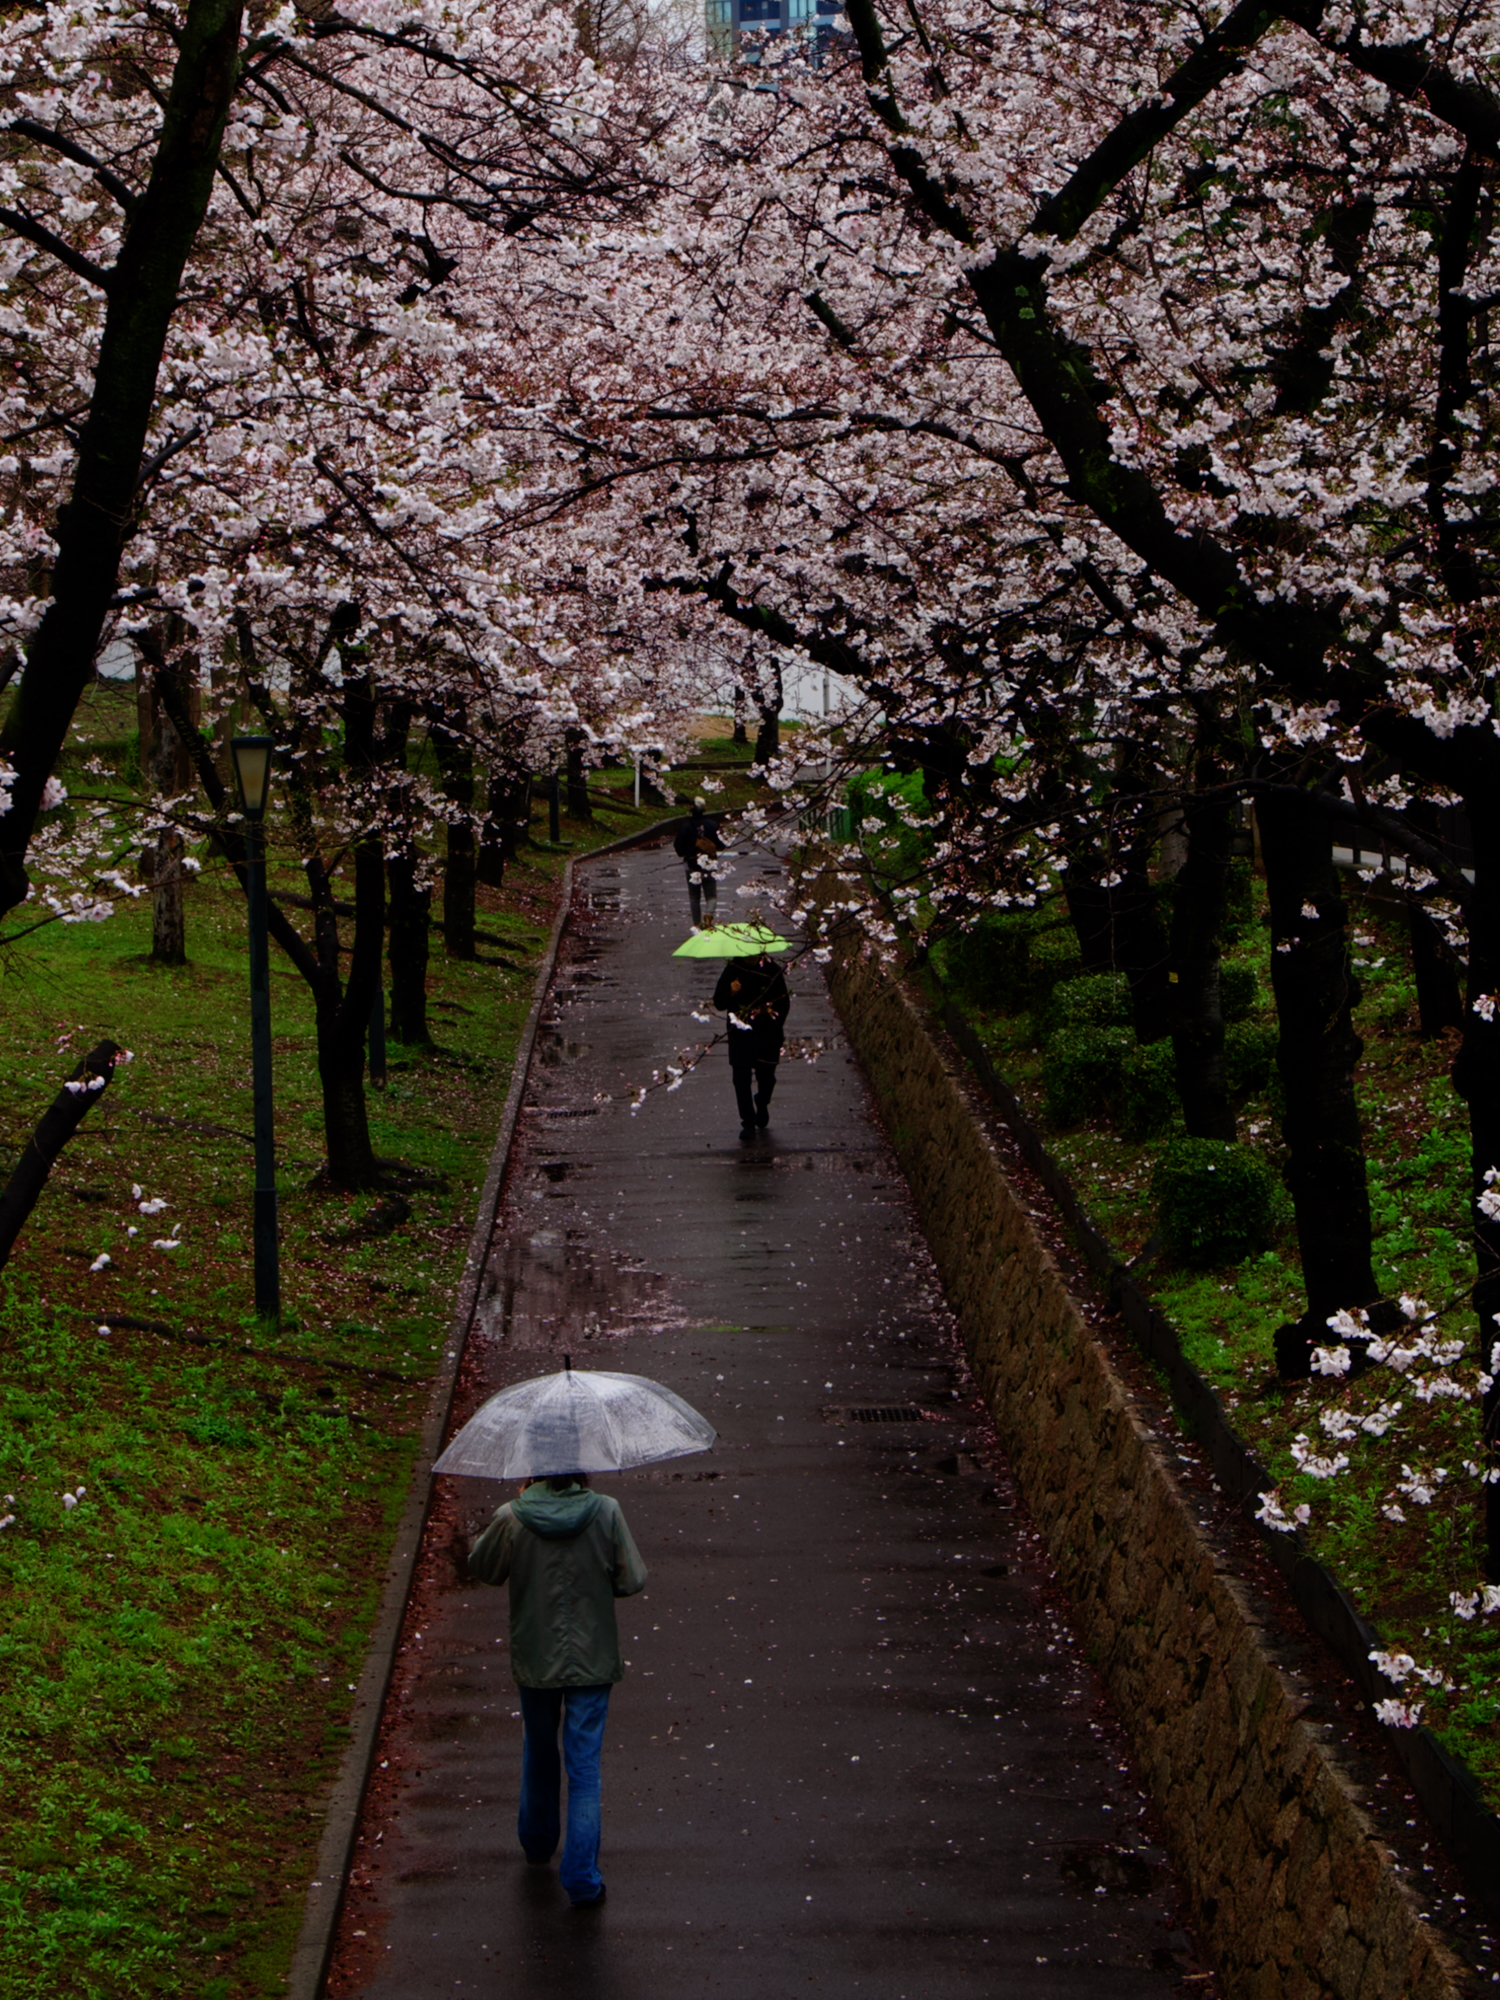 People walk under a canopy of cherry blossoms with umbrellas since it is raining